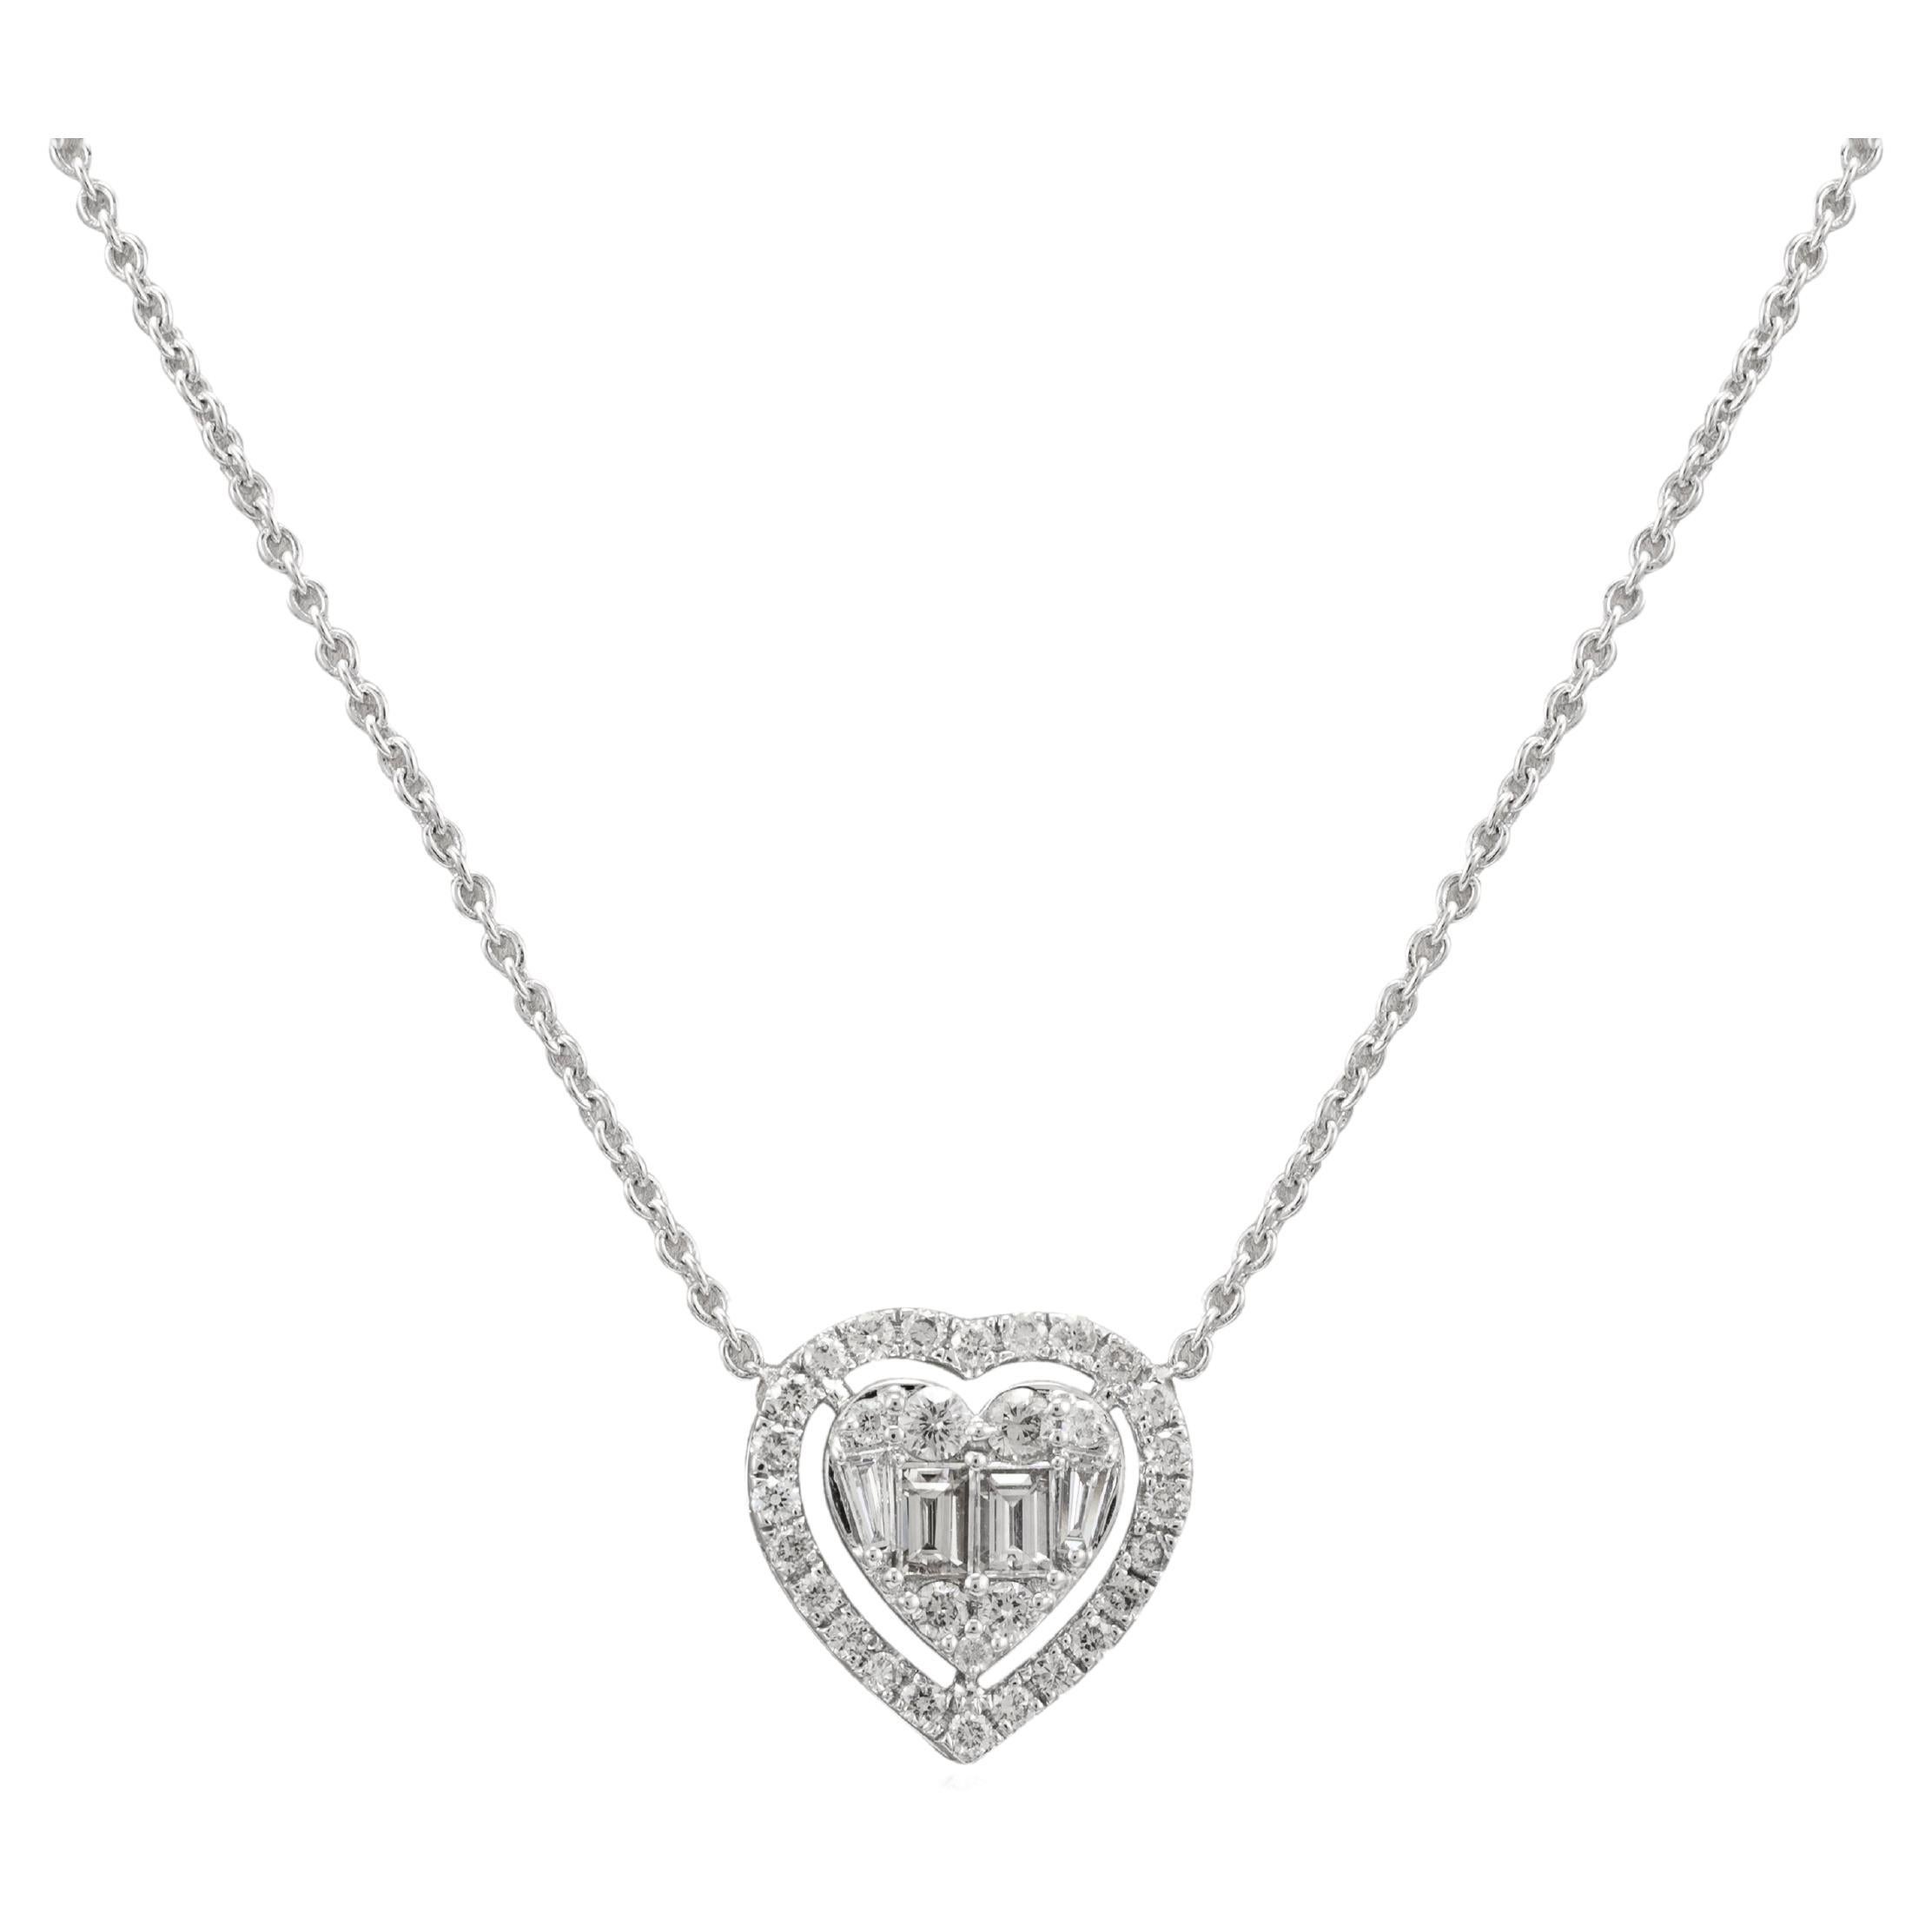 Heart Diamond Pendant Necklace 18k Solid White Gold, Gift For Her Christmas